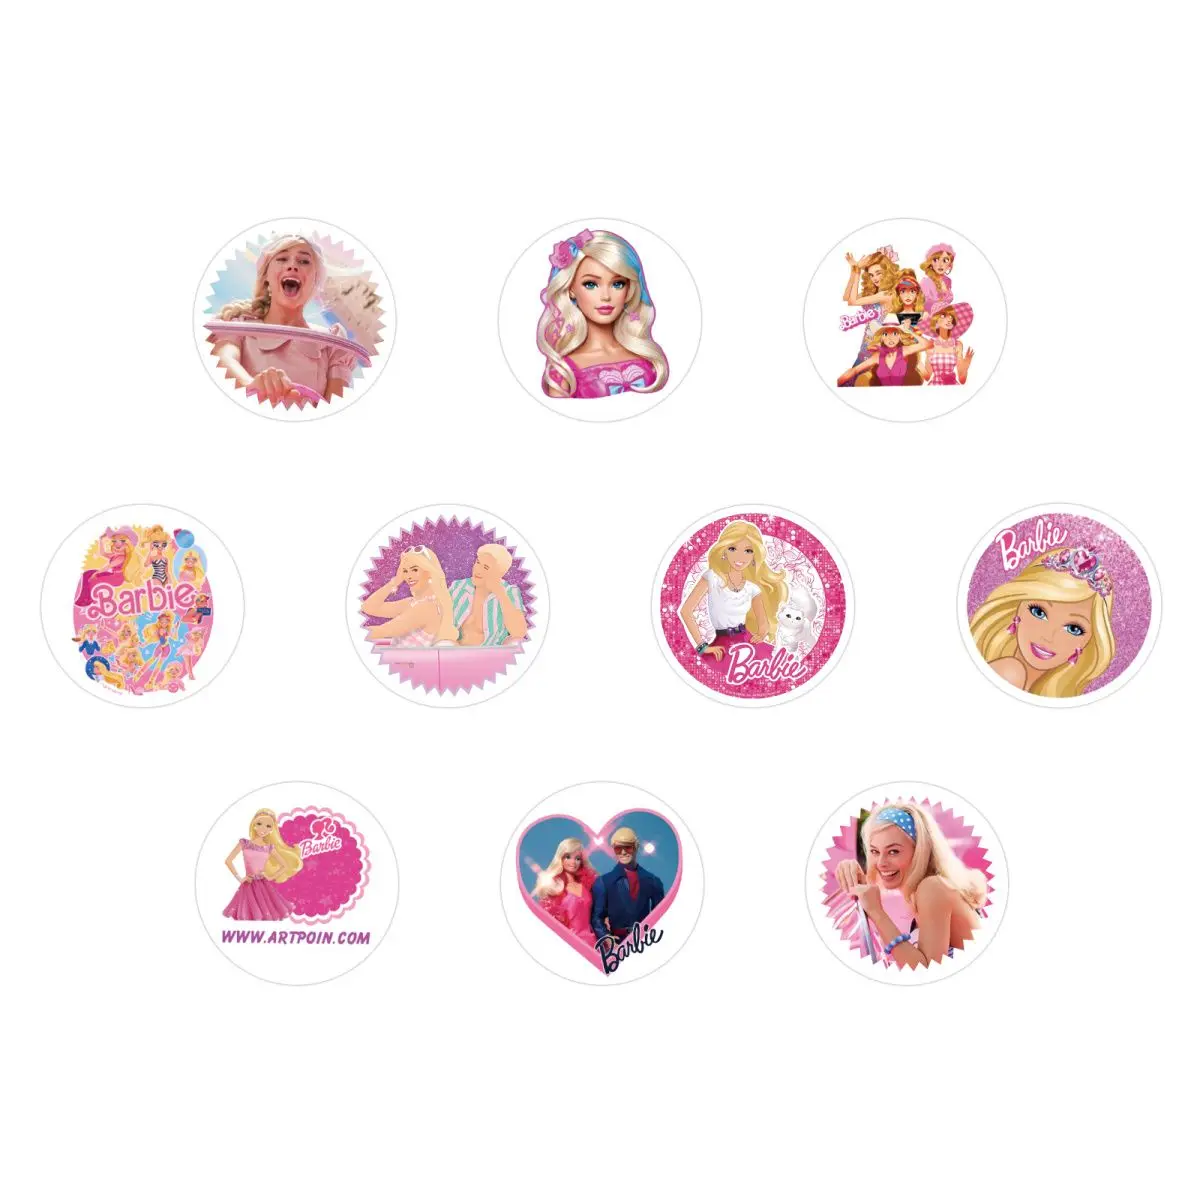 Barbie Stickers Roll 500 Sheets Kawaii Trendy Movie Decoration Diy Material Stylish Ornaments Cute Sweet Girls Kids Gift Lovely images - 6